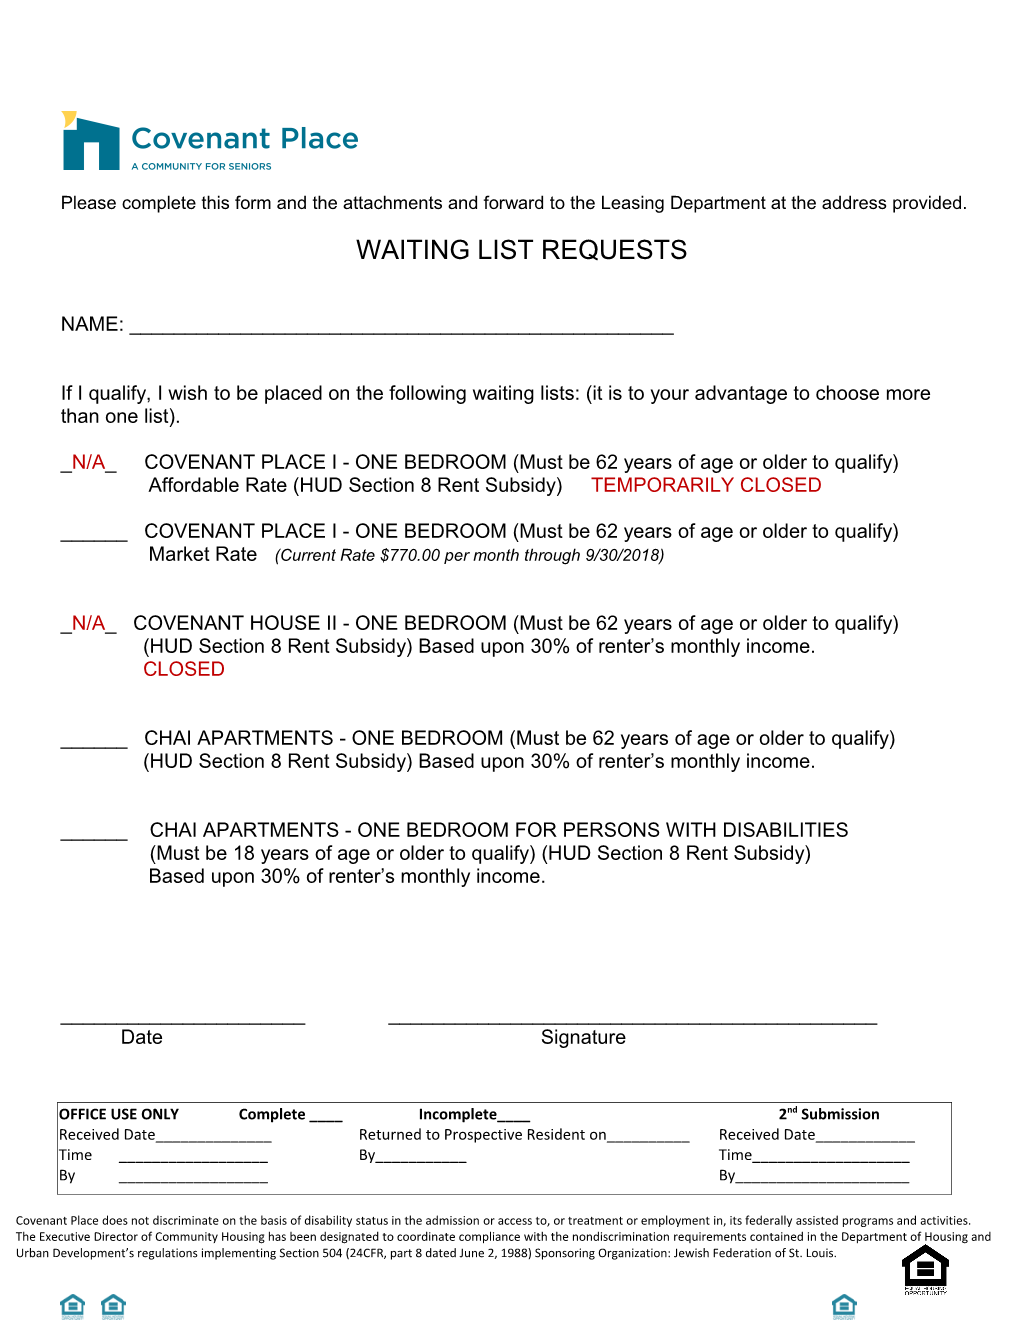 Preliminary Application for Apartment Rental/Resident Requirements